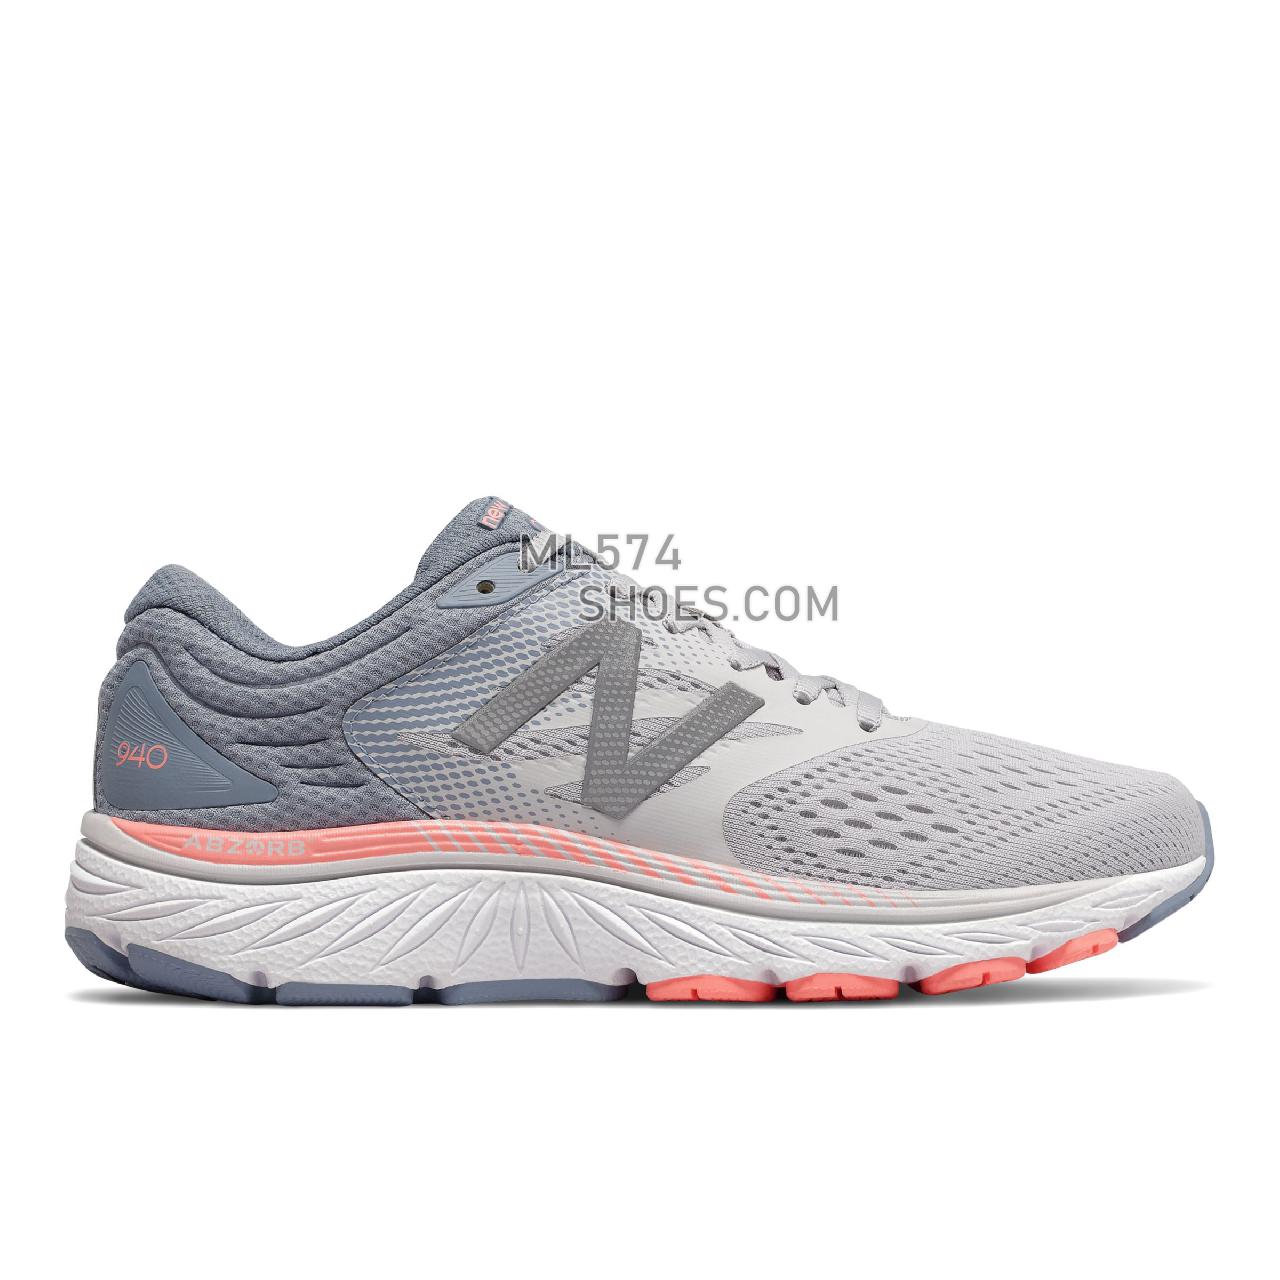 New Balance 940v4 - Women's Stability Running - Summer Fog with Reflection and Ginger Pink - W940GP4